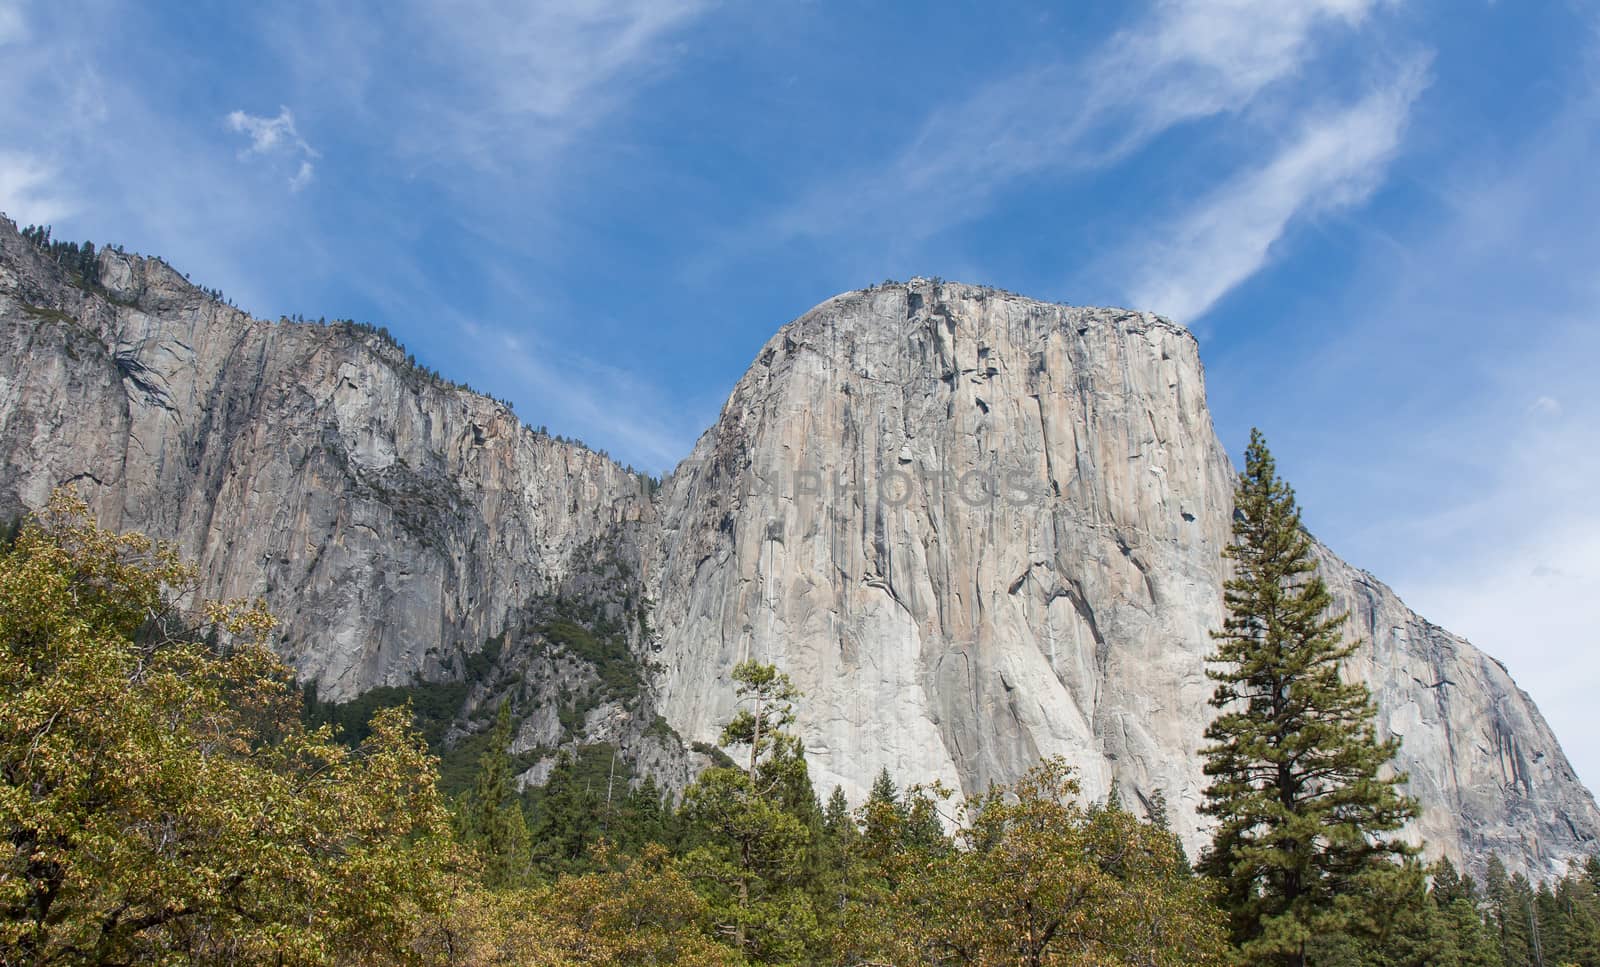 El Capitan and the Wall of Granite by picturyay